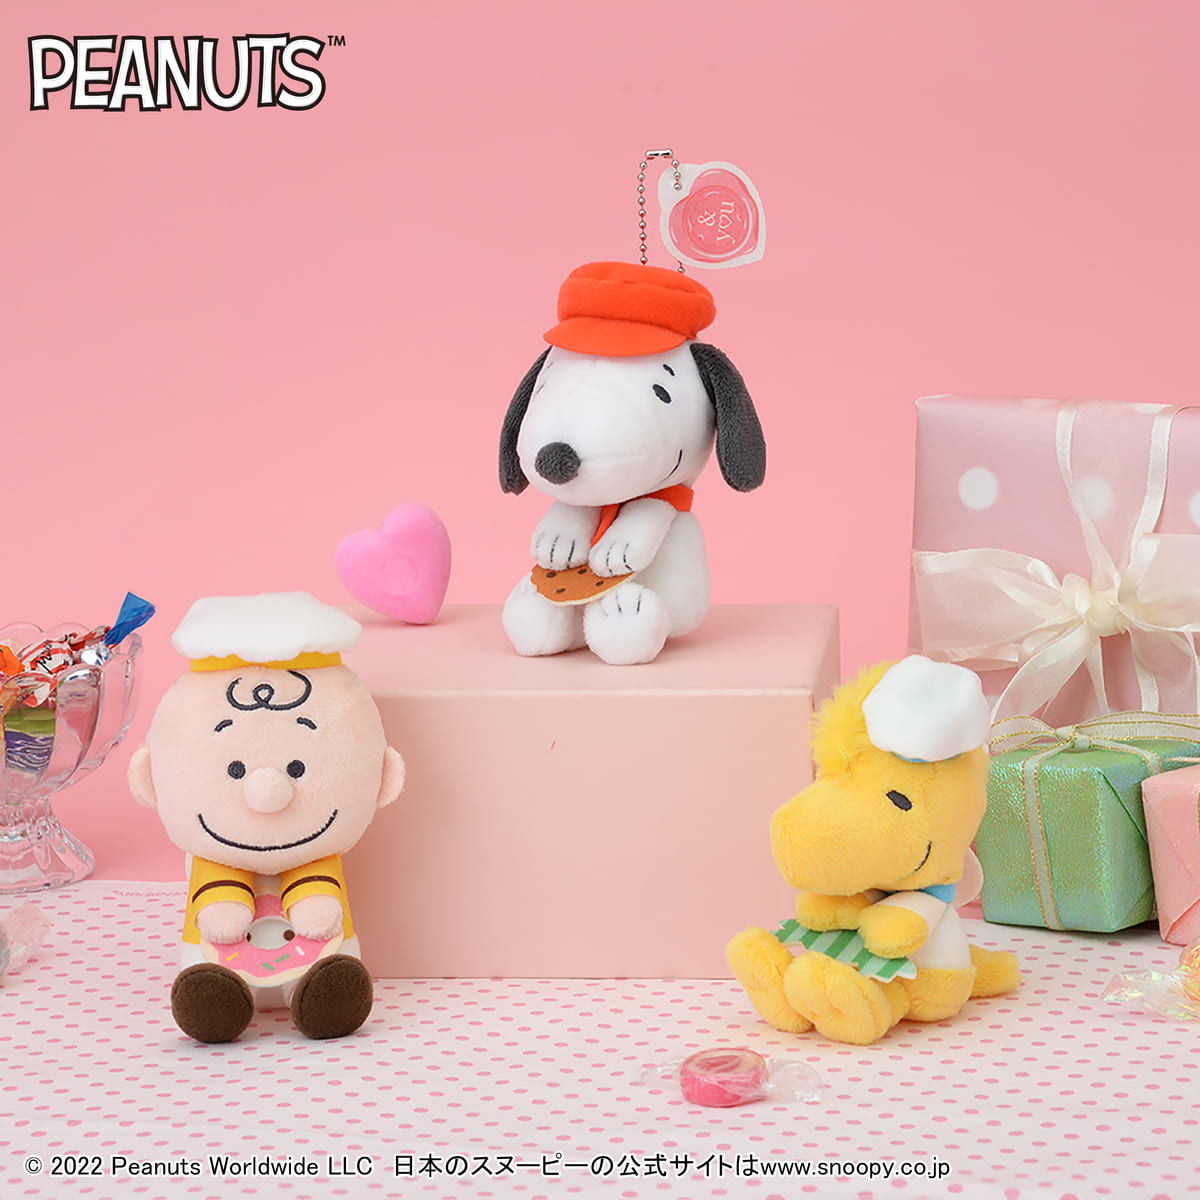 SNOOPY™　& you　スイーツキーチェーンマスコット